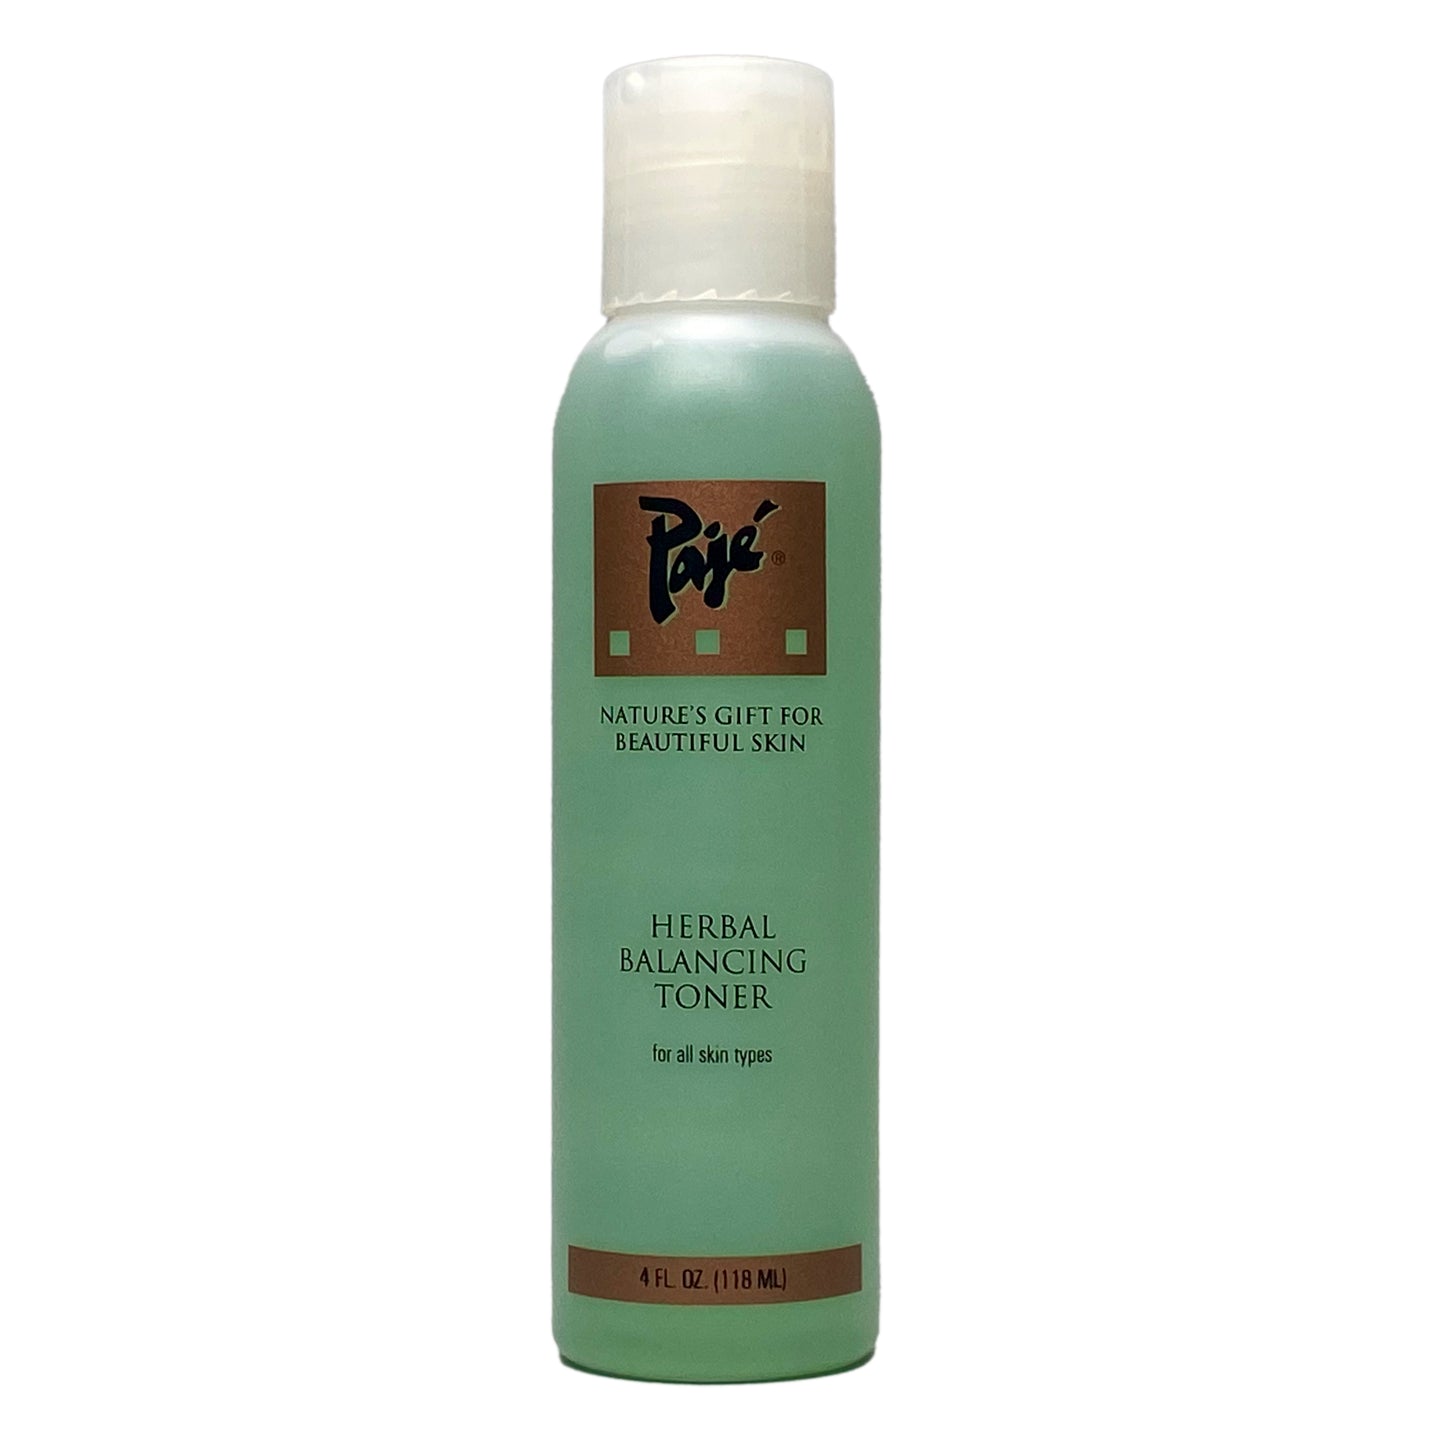 Pajé Herbal Balancing Toner stimulates, tones, and freshens the skin. Natural plant extracts help balance and control sebum and oil production to minimize shine. 